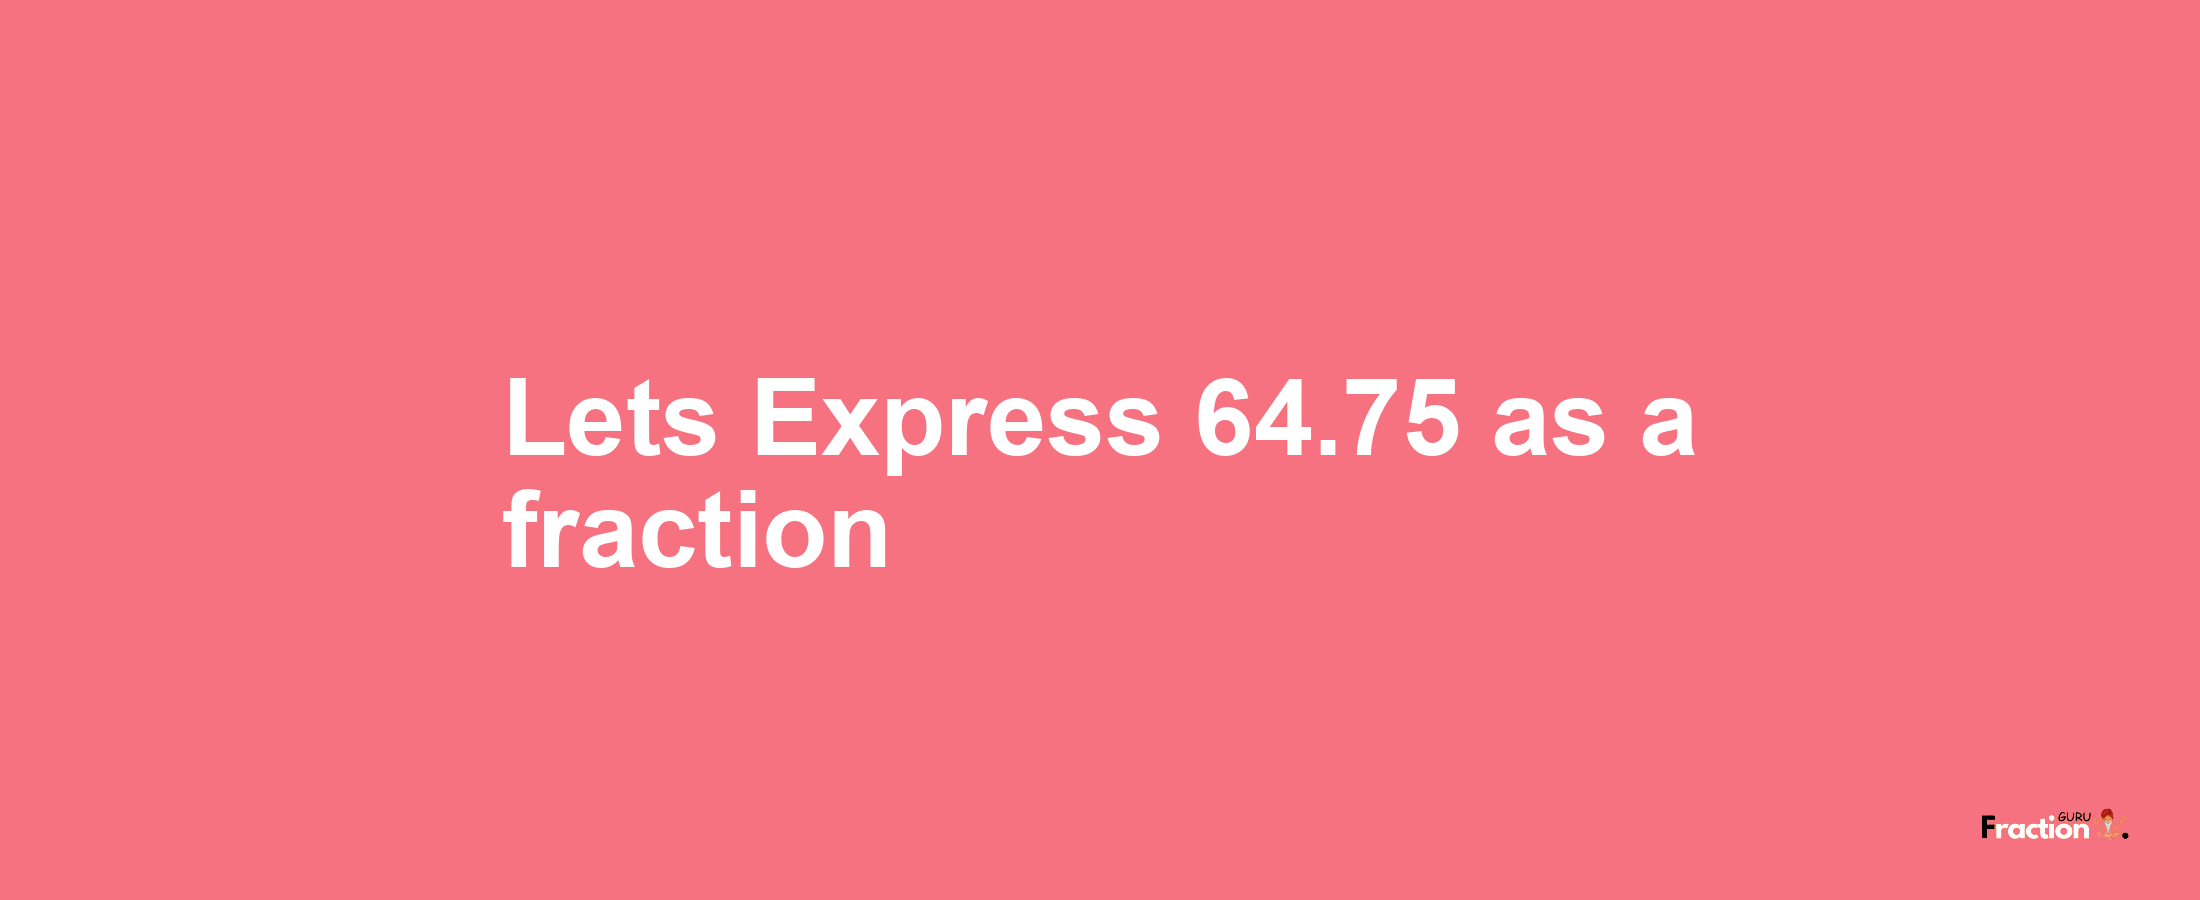 Lets Express 64.75 as afraction